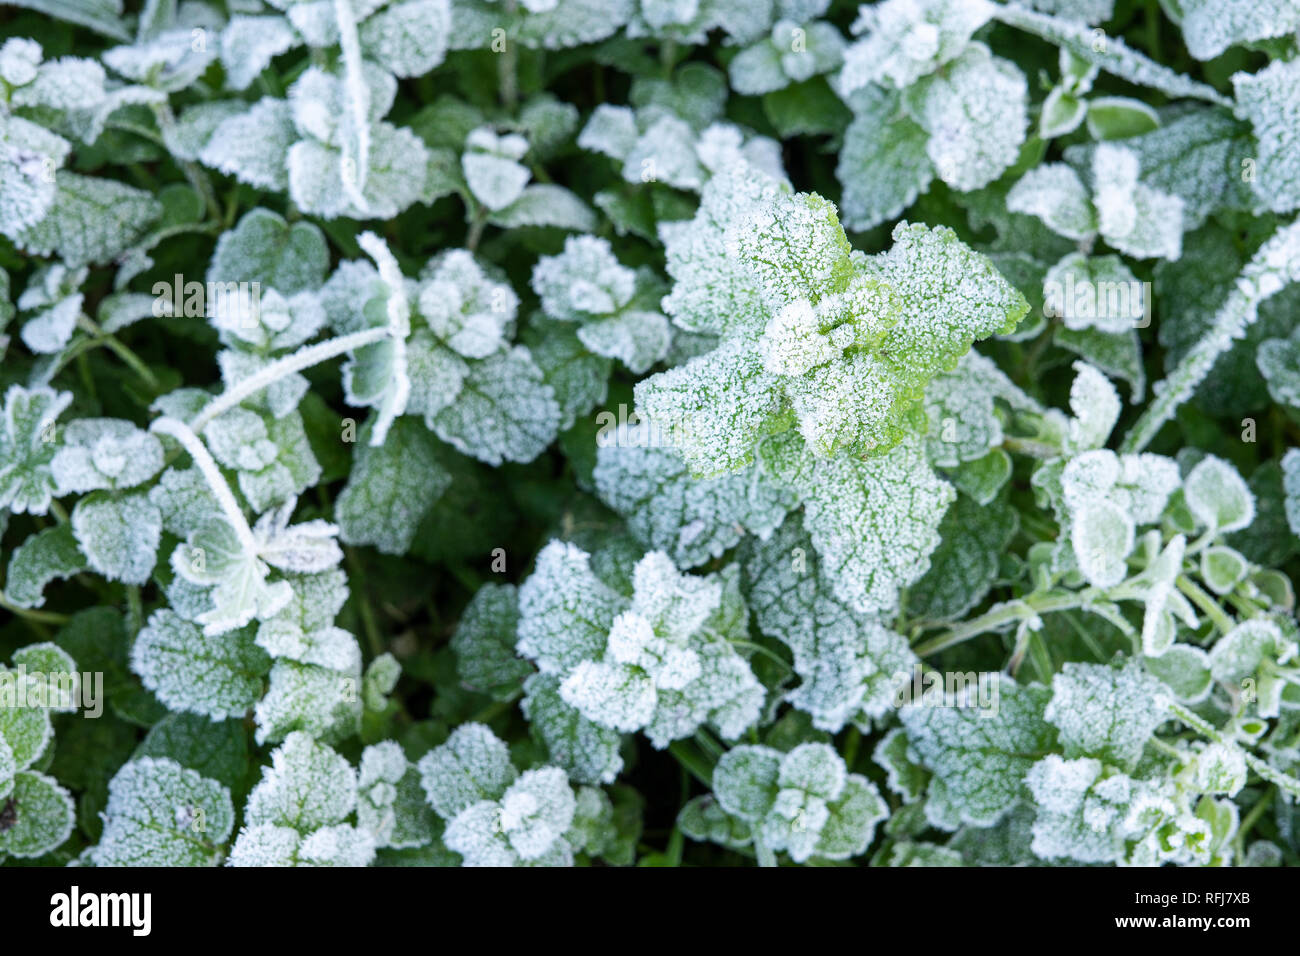 Winter nature background with leaves of wild peppermint covered with white hoar frost and ice crystal formation Stock Photo